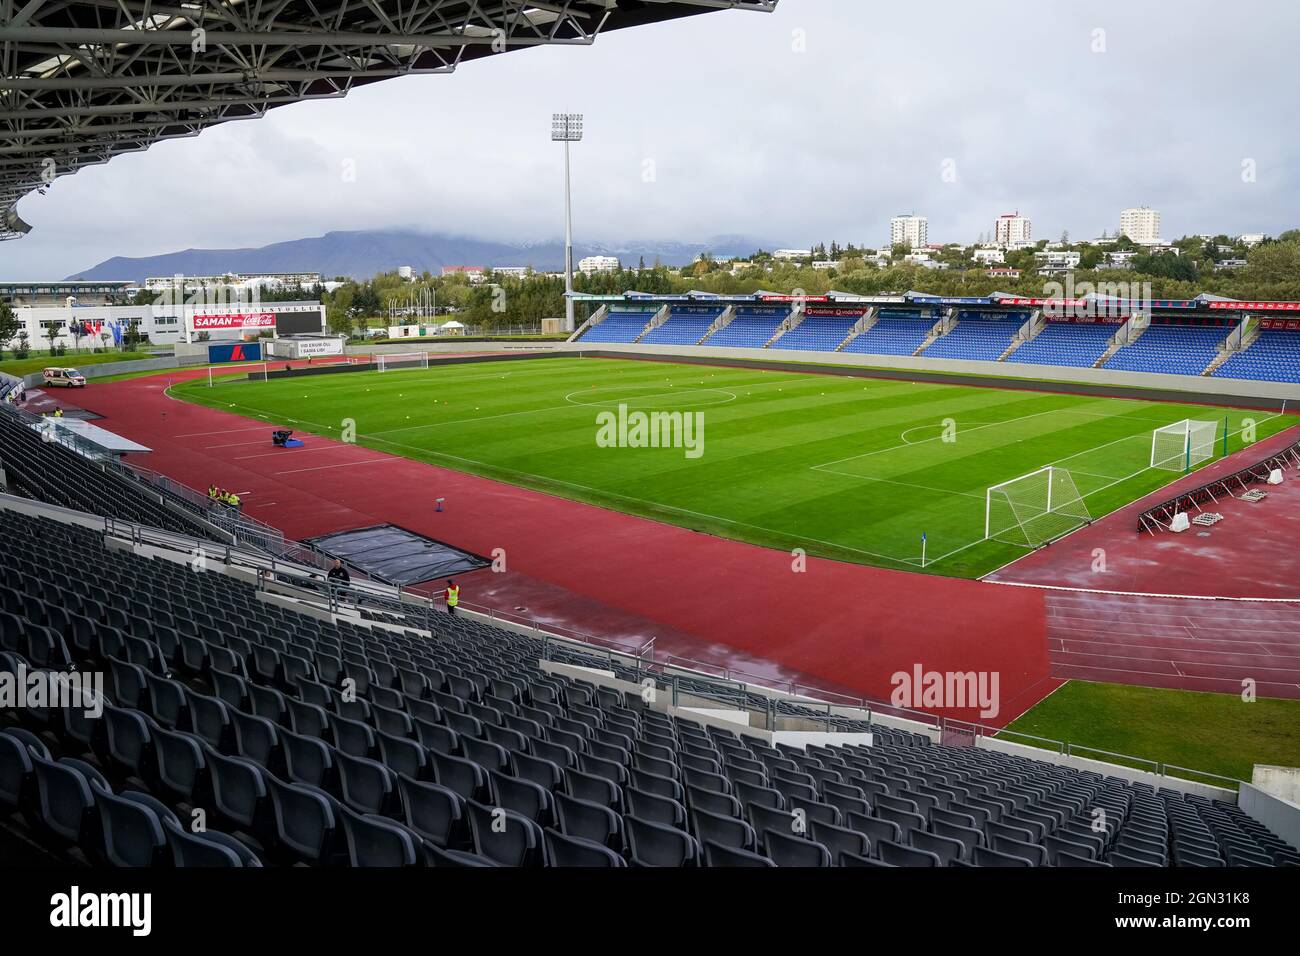 REYKJAVIK, ICELAND - SEPTEMBER 21: General view of Laugardalsvollur during the 2023 FIFA Women's World Cup Qualifying Round Group C match between Iceland and Netherlands at Laugardalsvollur on September 21, 2021 in Reykjavik, Iceland (Photo by Andre Weening/Orange Pictures) Stock Photo